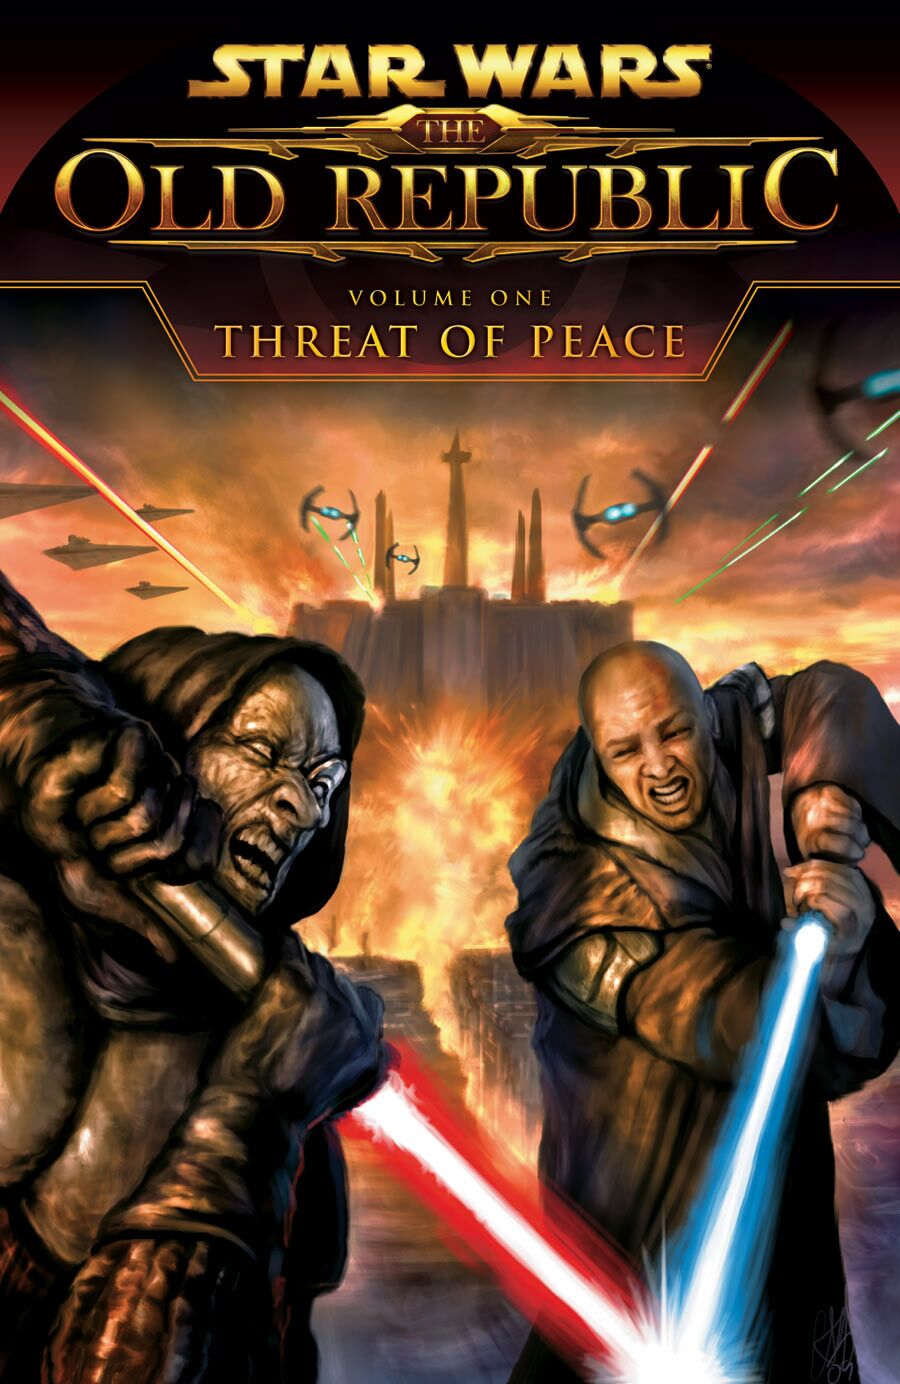 The Old Republic Volume 1: Threat of Peace